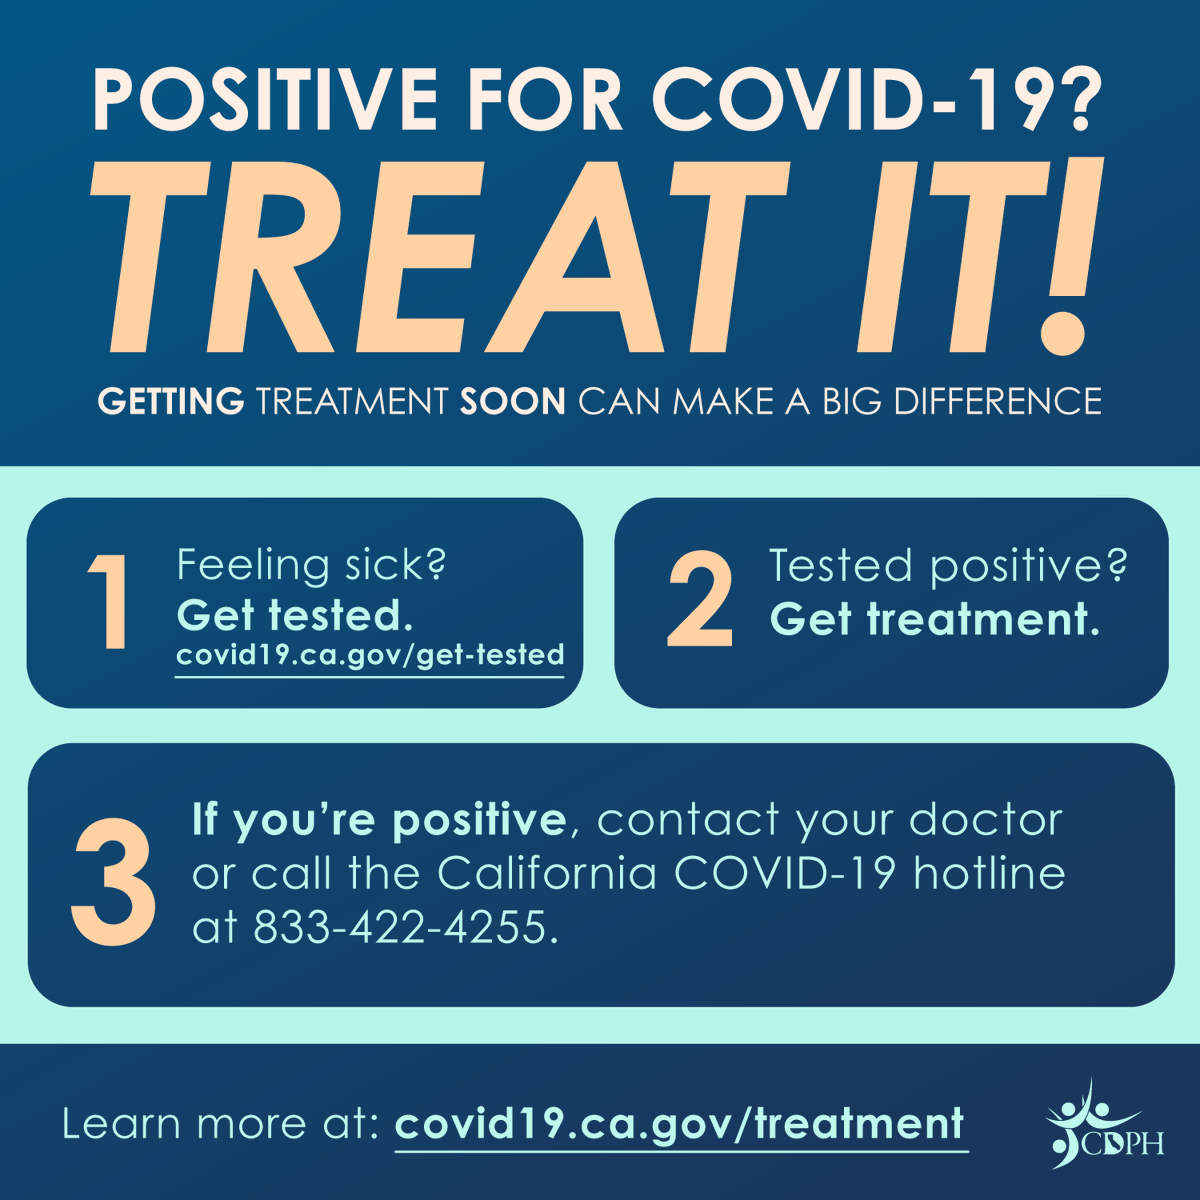 COVID-19 is still here. If you feel sick and think you have COVID-19, take action! COVID-19 treatments at safe and effective for preventing serious illness and hospitalization. Contact Via Care at (323) 268-9191 for testing and treatment. 

#ViaCareCares #Test2Treat #BeatCOVID19